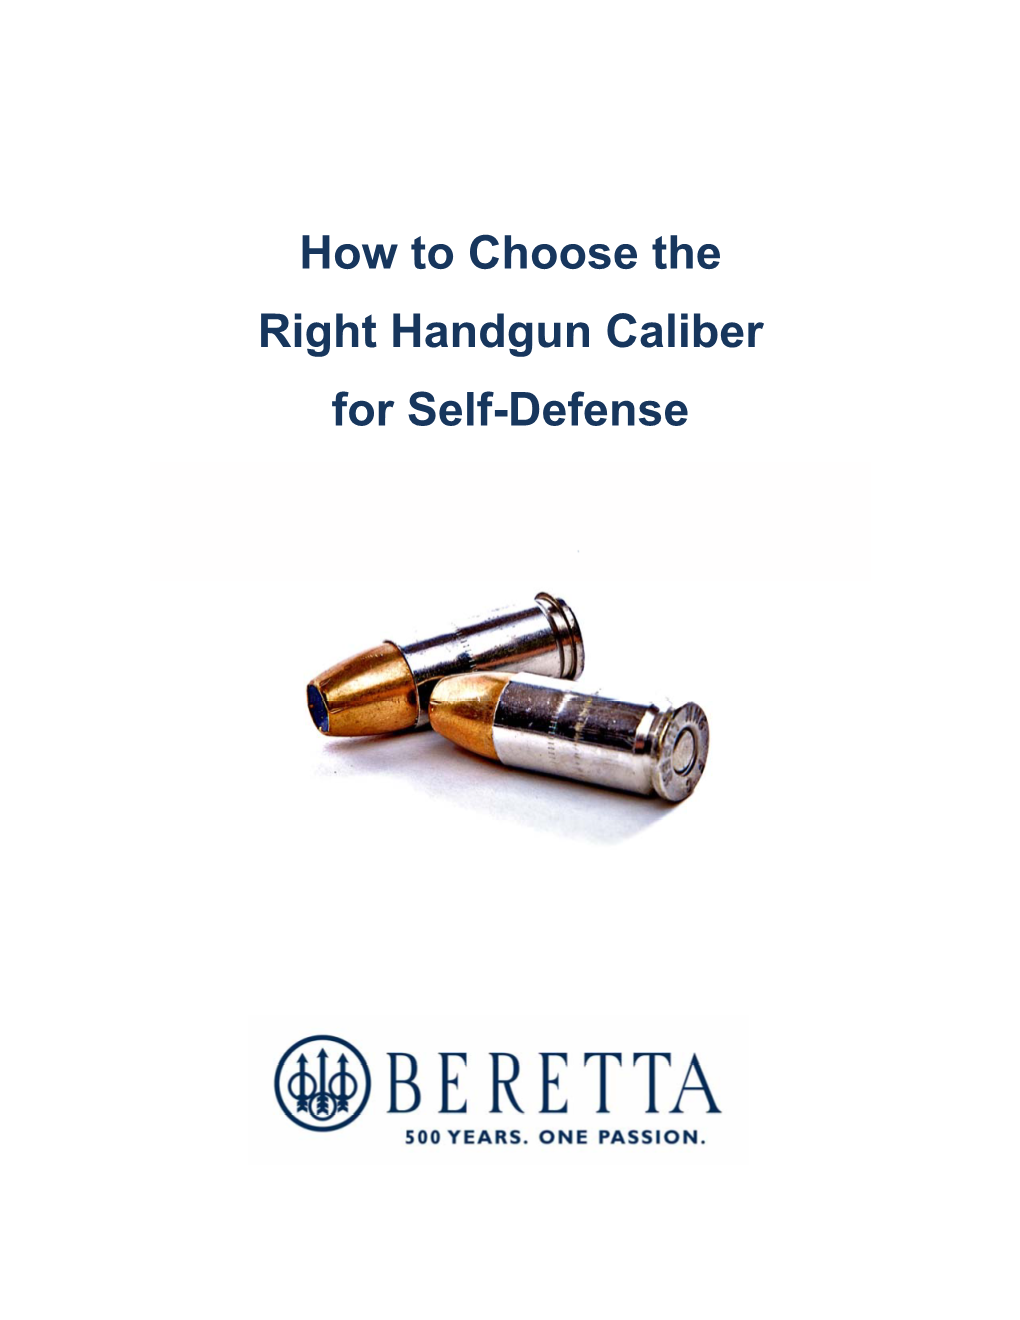 How to Choose the Right Handgun Caliber for Self-Defense 2 How to Choose the Right Handgun Caliber for Self‐Defense